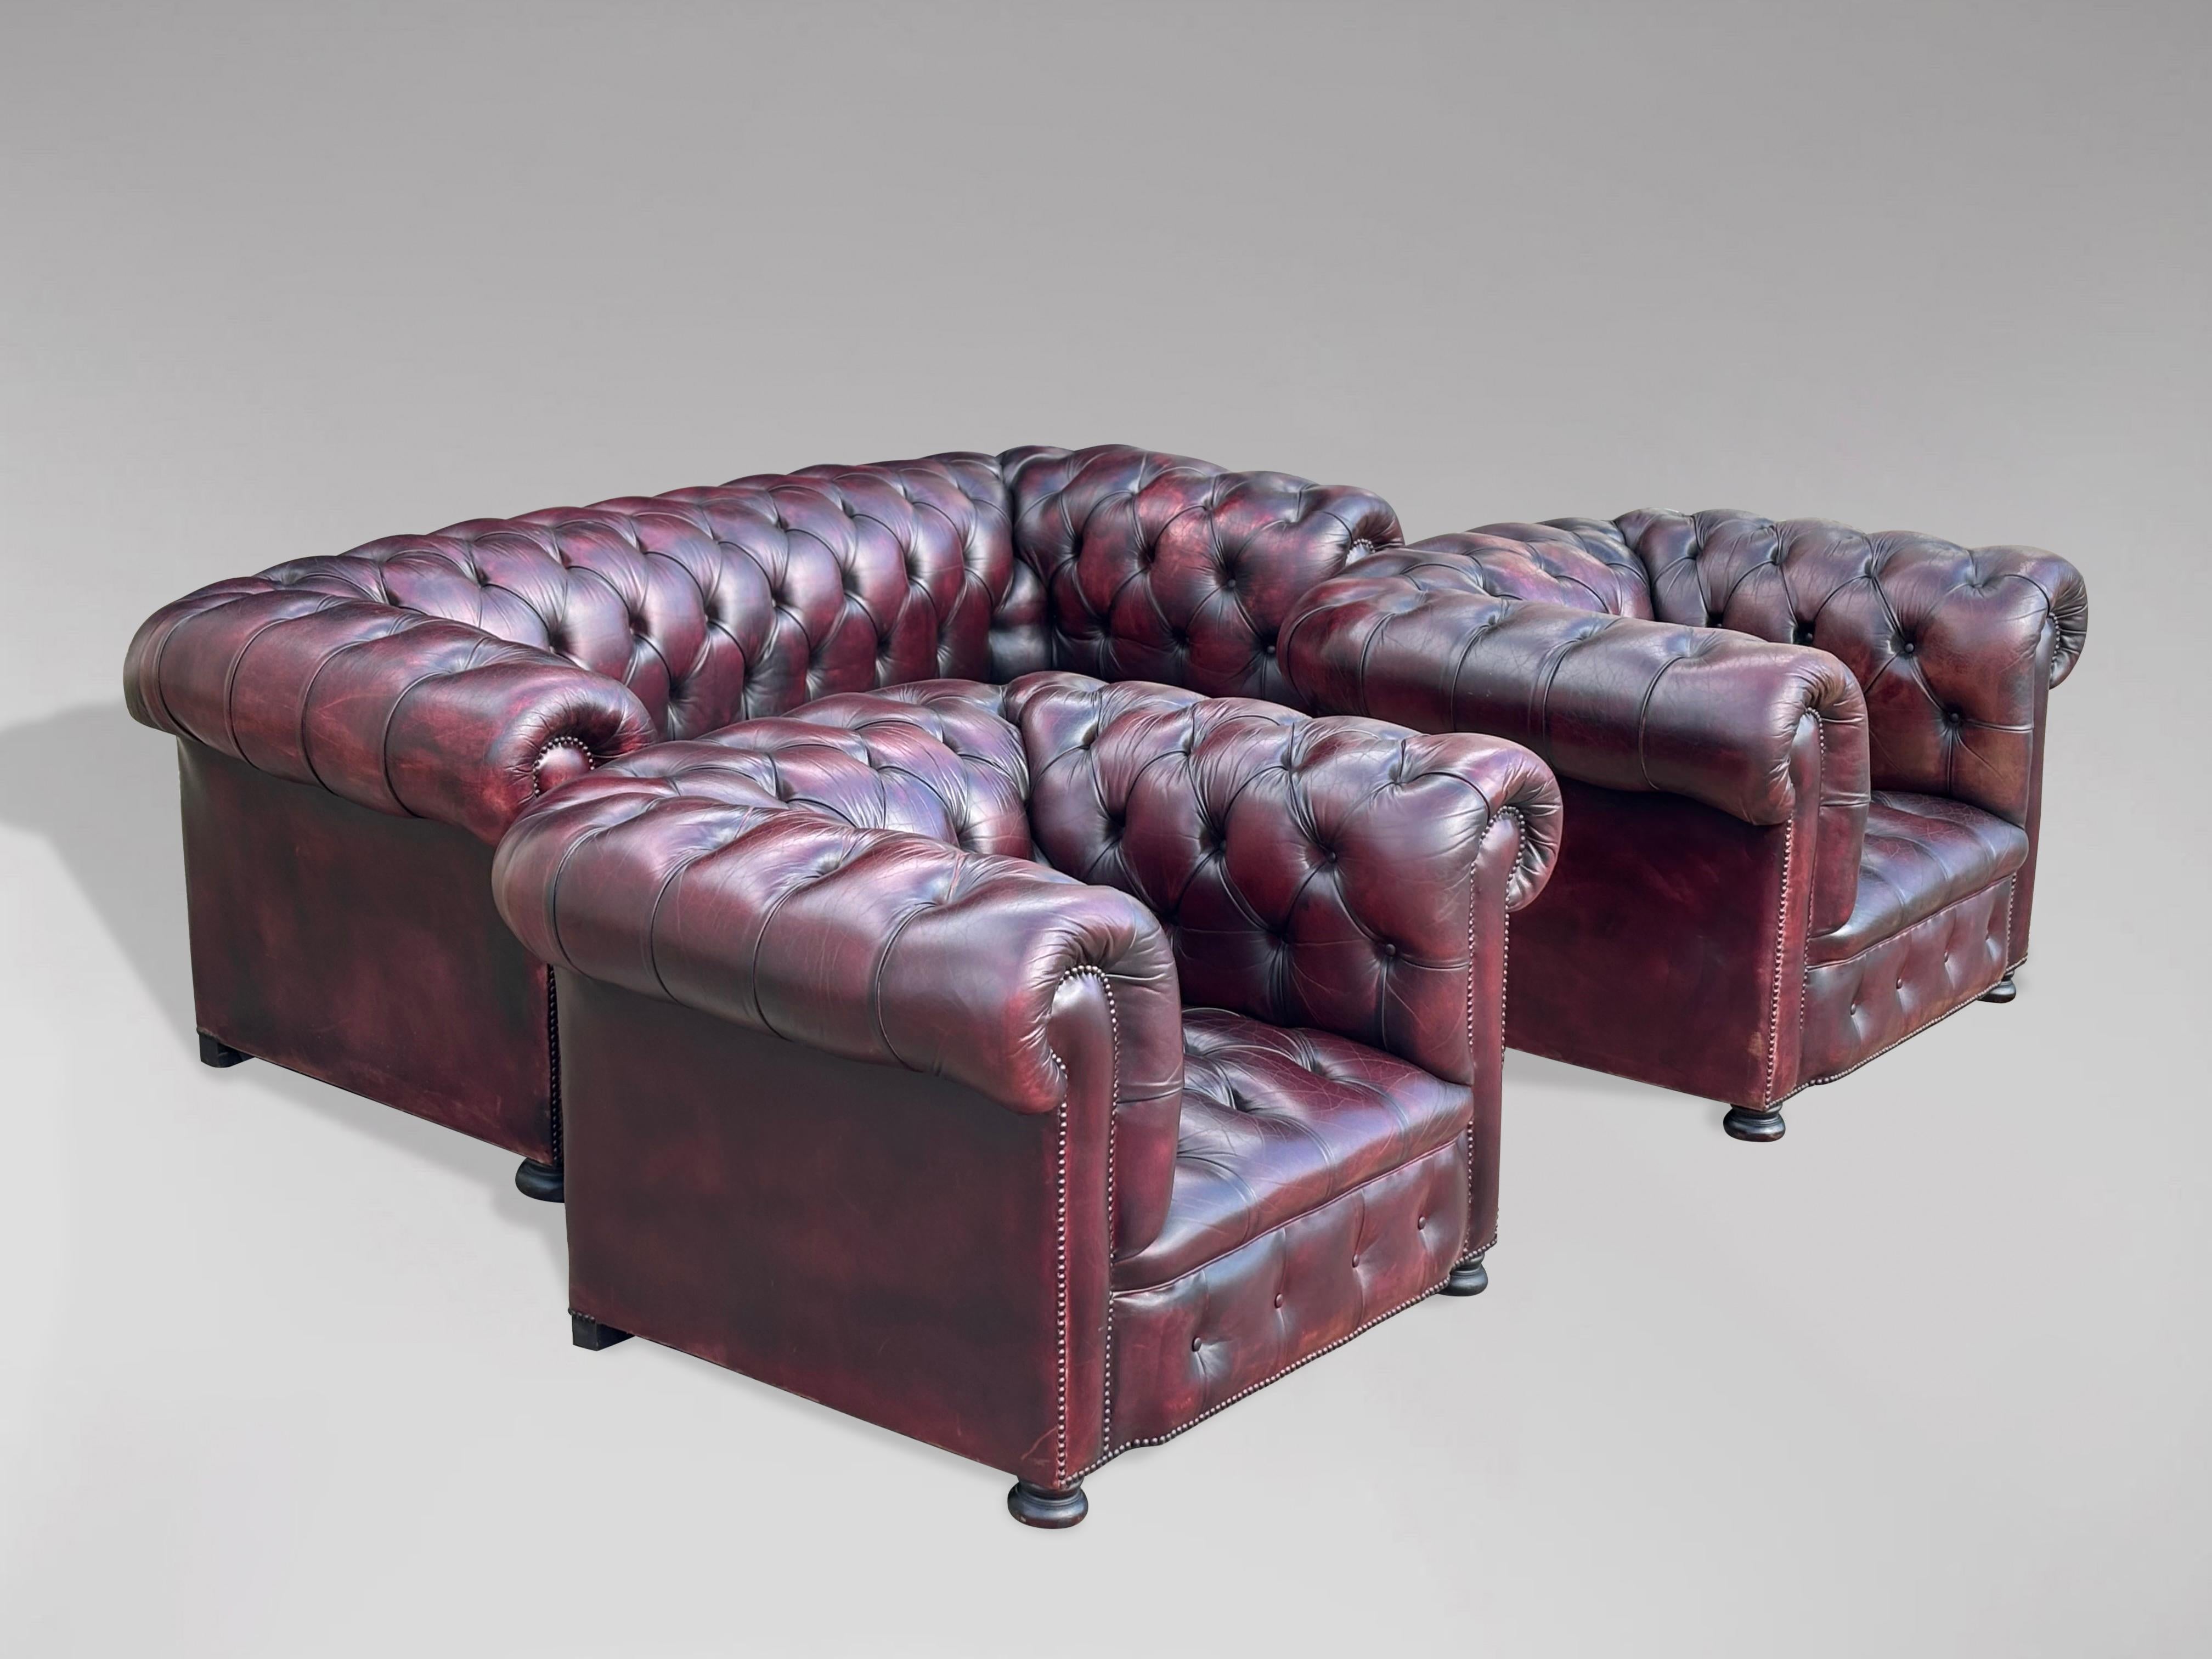 Hand-Crafted Stunning Three Piece Burgundy Leather Chesterfield Suite For Sale